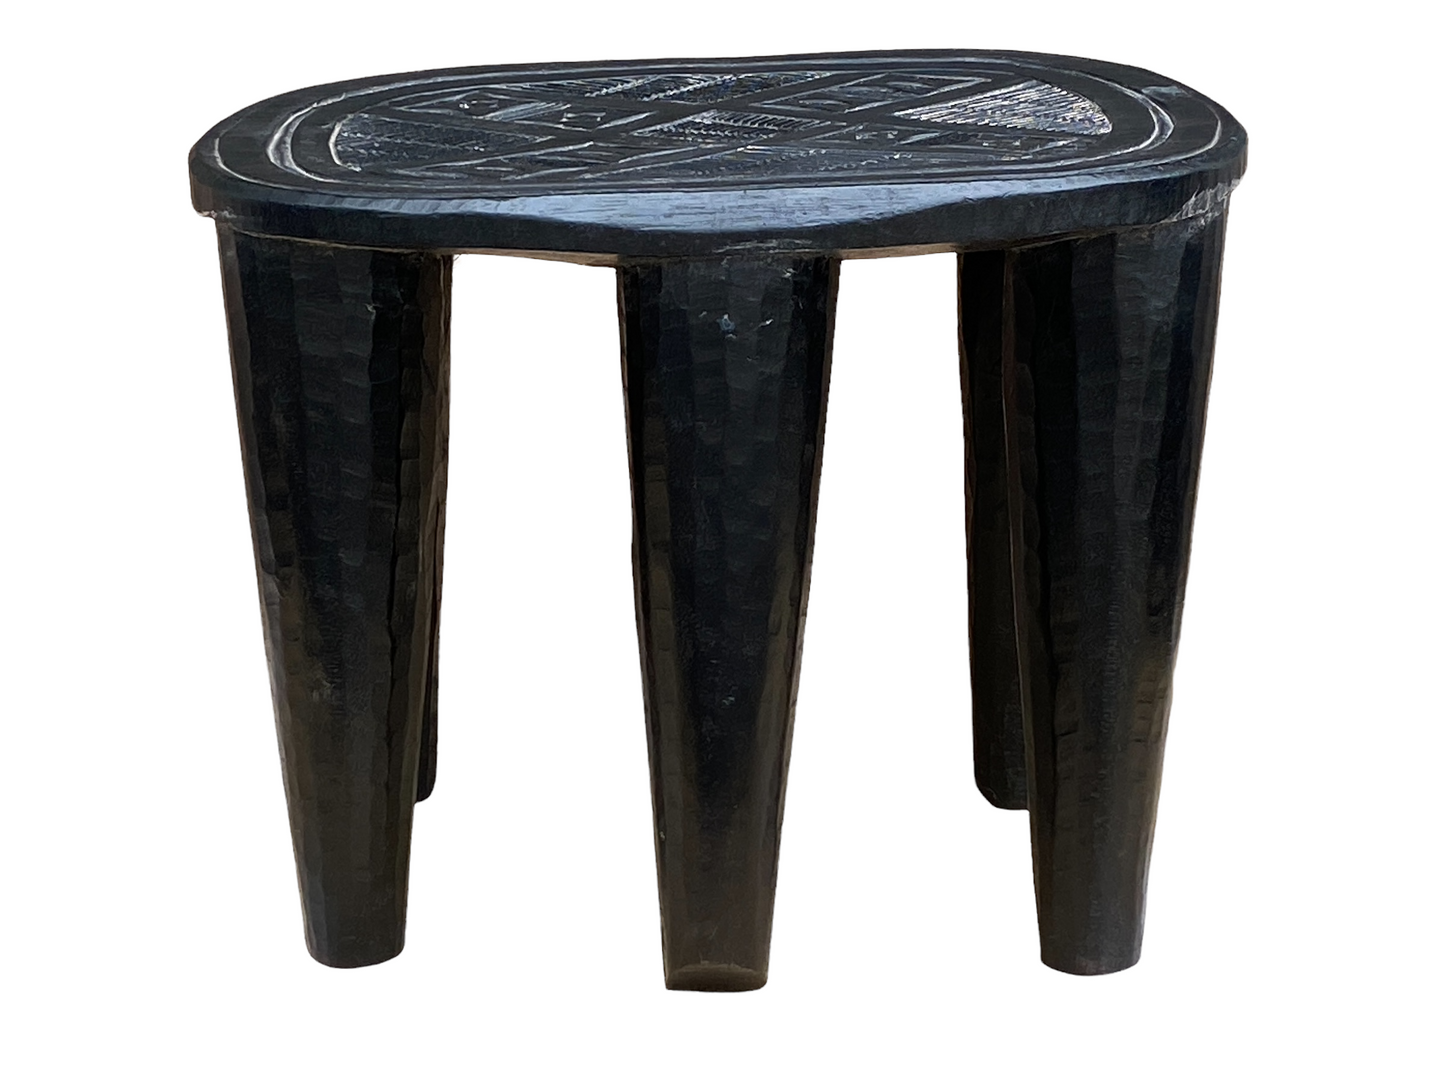 #4514 Superb African   Nupe Stool / Table Nigeria  16" H by 20" W